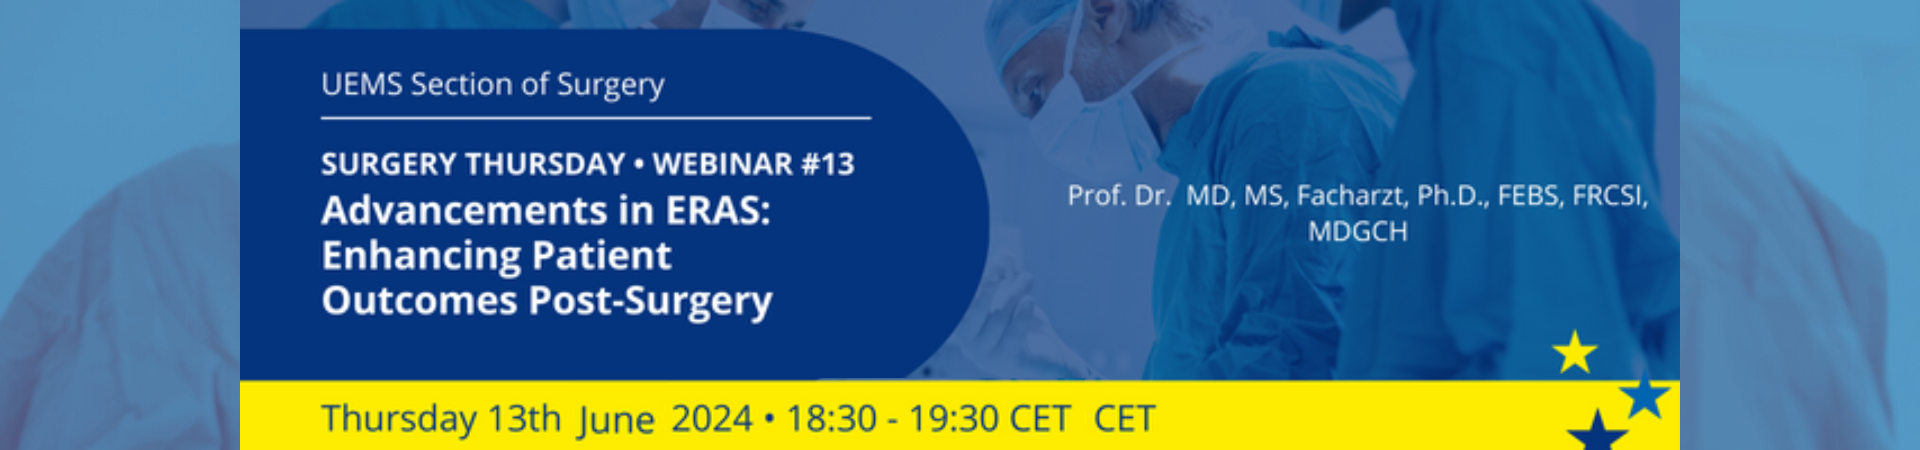 UEMS Section of Surgery │Webinar #13 Advancements in ERAS: Enhancing Patient Outcomes Post-Surgery